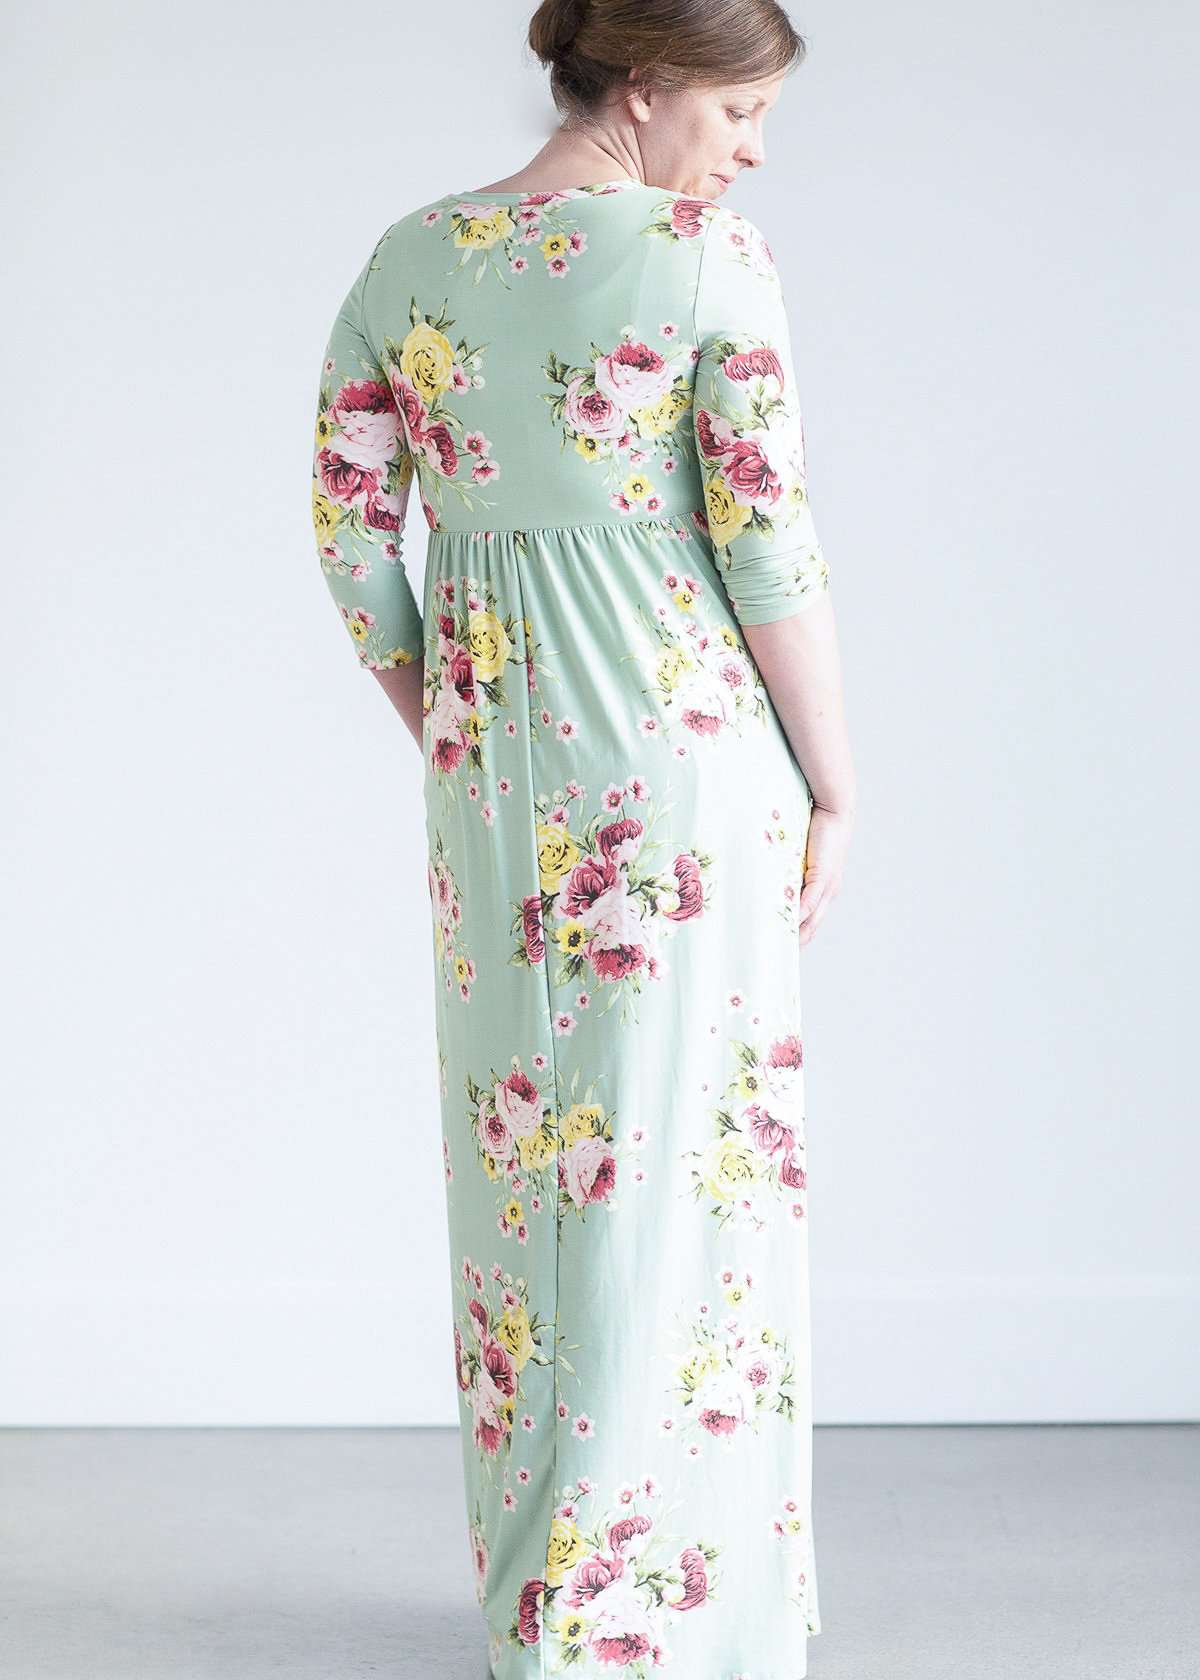 woman wearing a modest mint and floral maxi dress